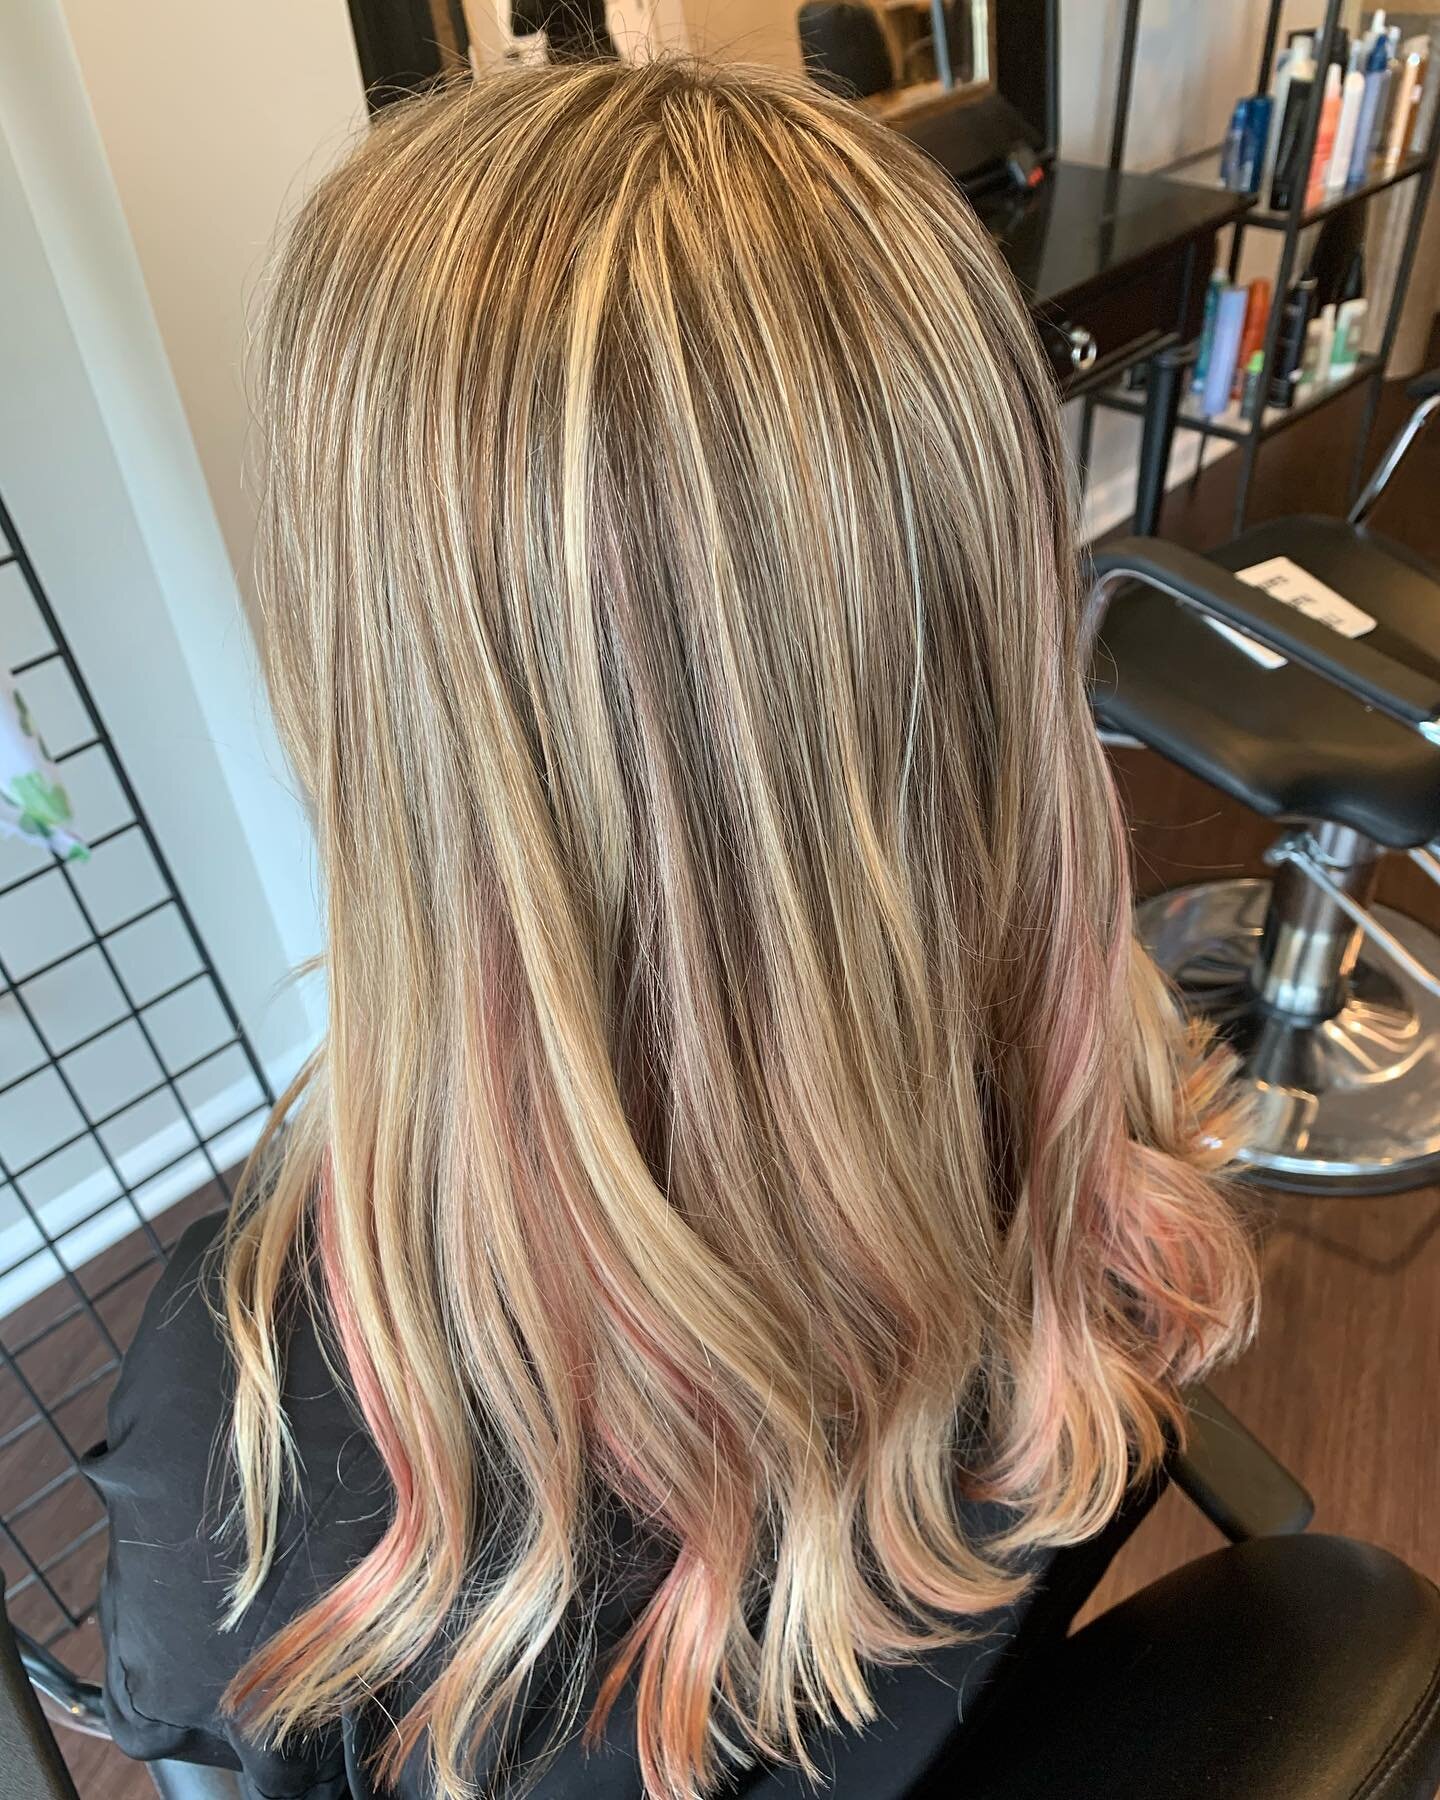 Cool blonde highlights with a touch of Nudist Pink Color Create